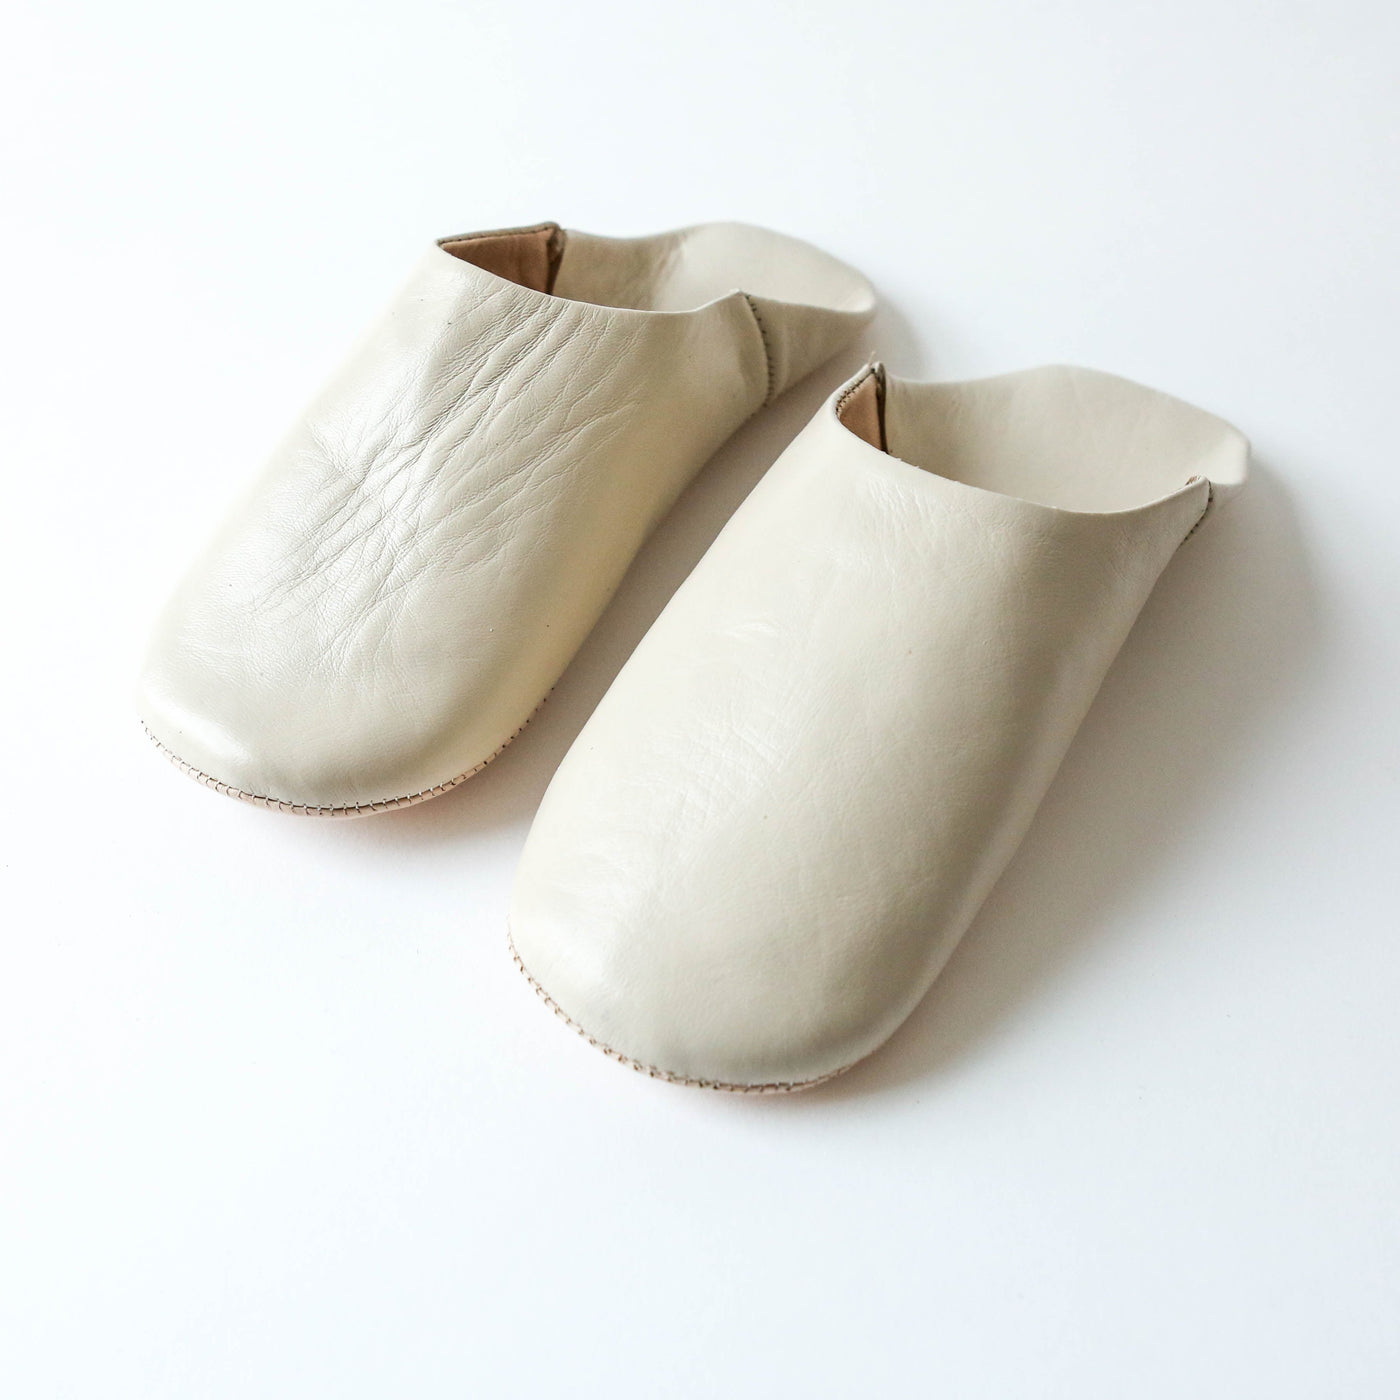 Moroccan Leather Babouche Slippers - Chalk